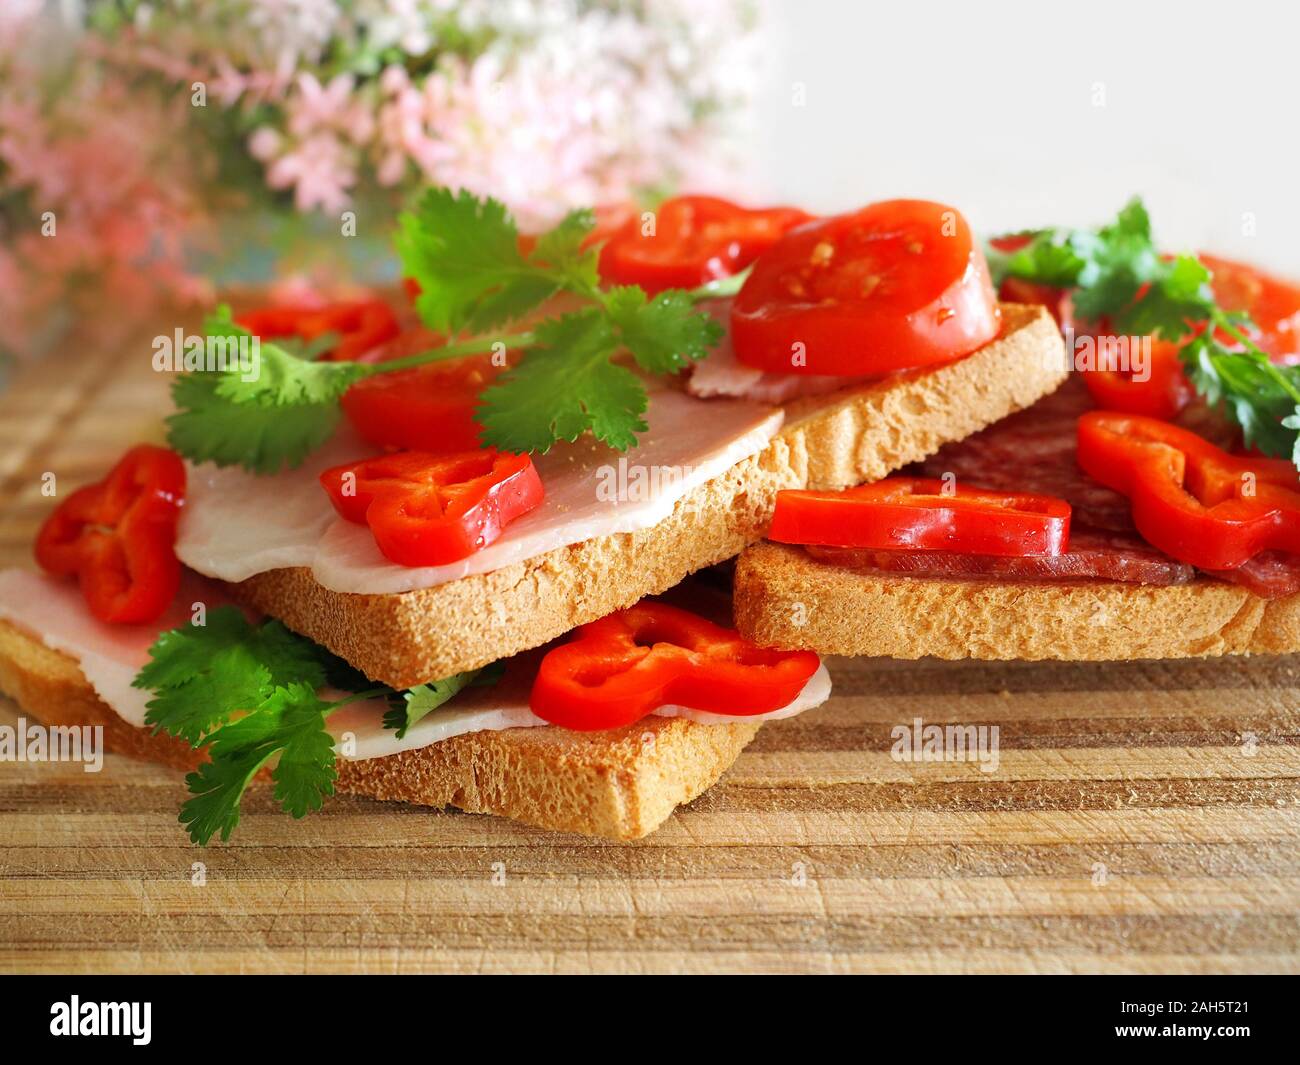 White bread sandwiches with pastrami and vegetables. Stock Photo